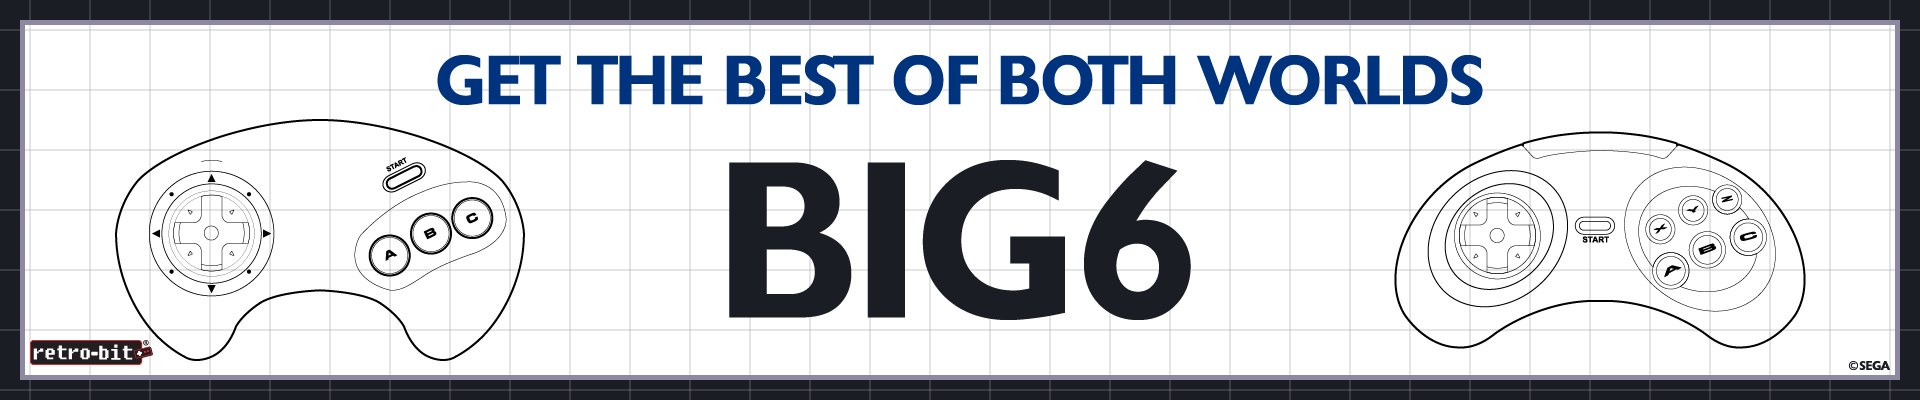 BIG6 - Get the best of both worlds